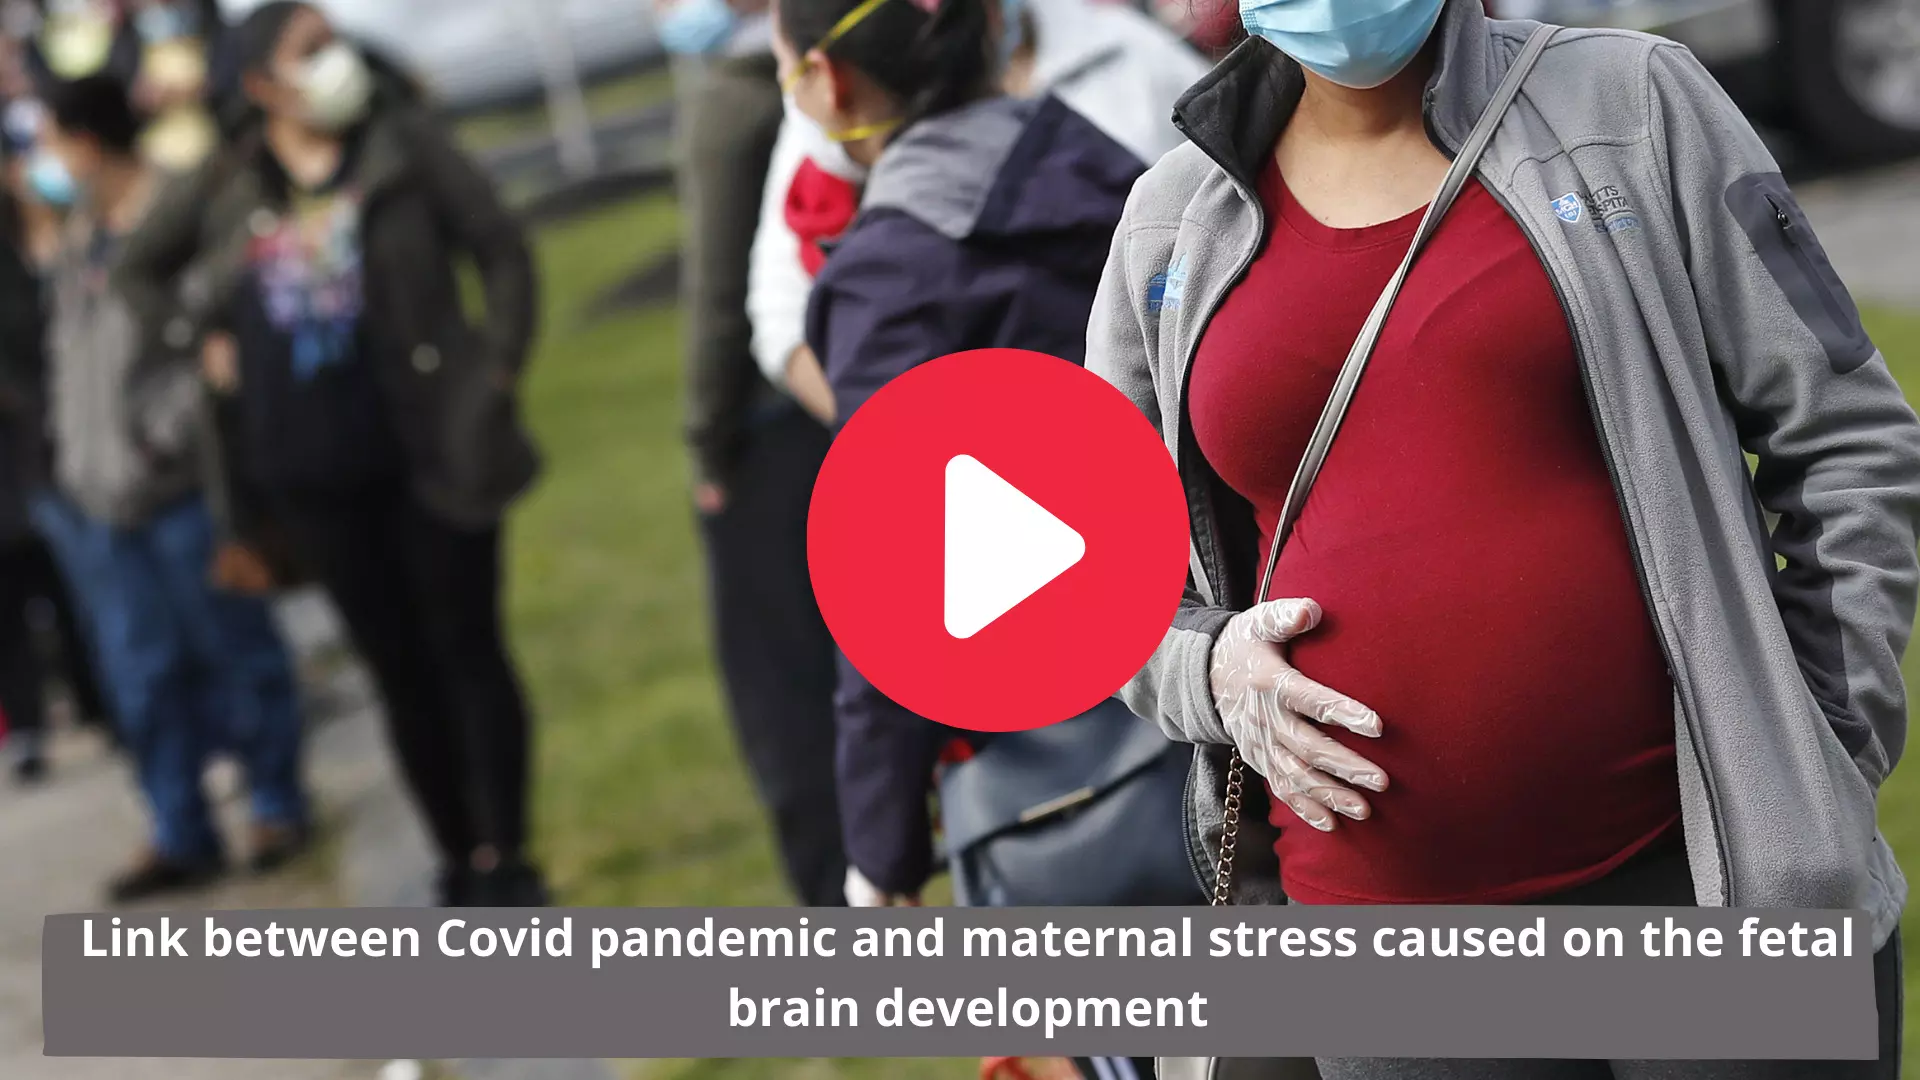 Link between Covid pandemic and maternal stress caused on the fetal brain development